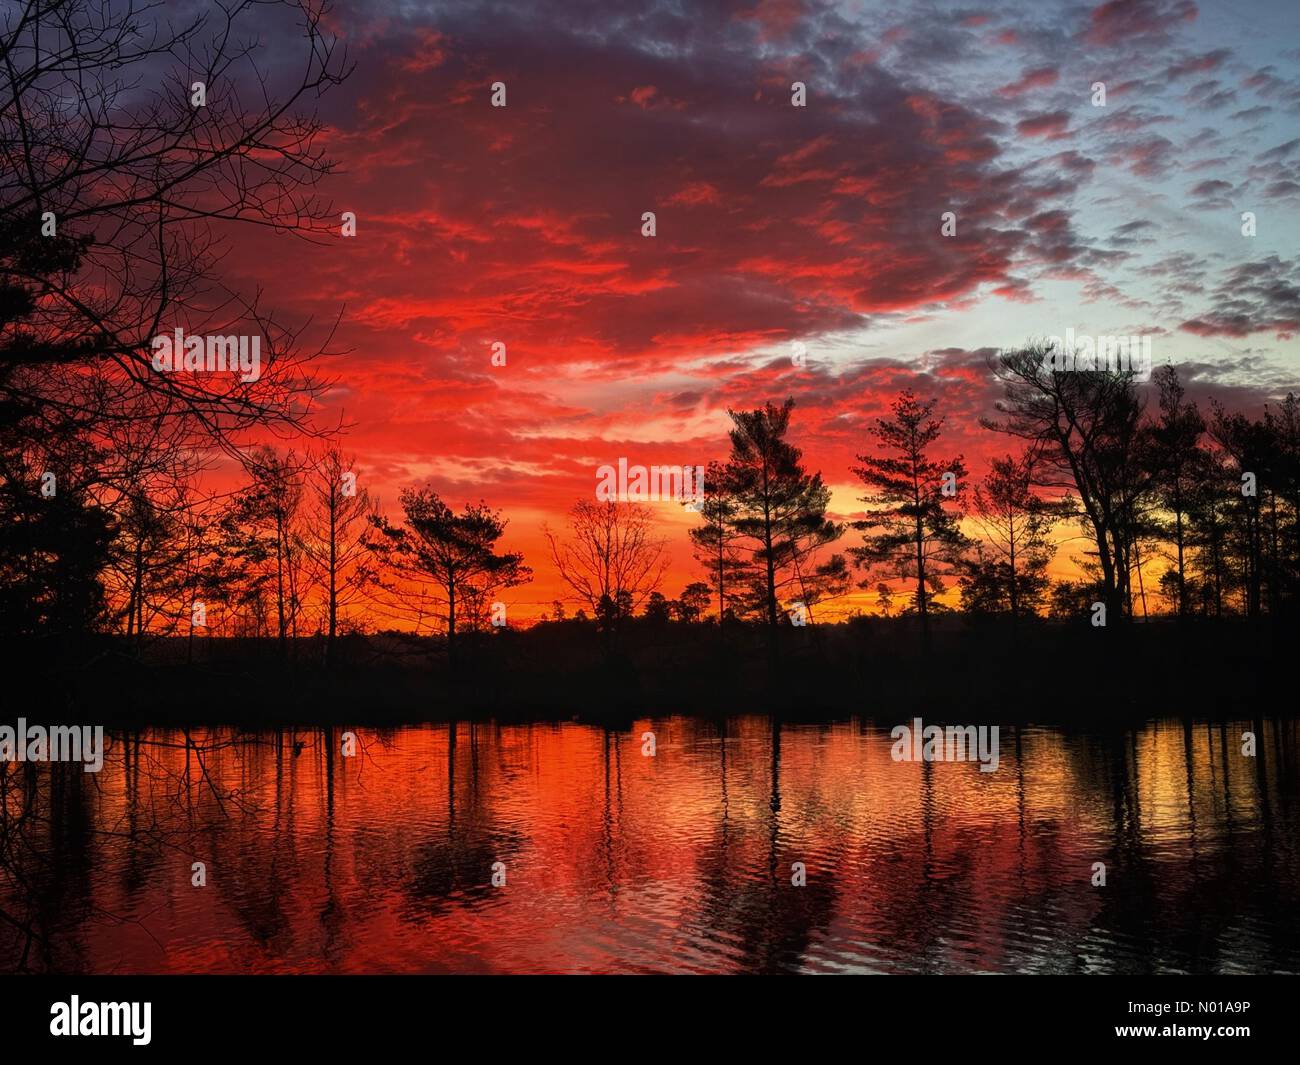 Godalming, Surrey. 28th Jan 2024. UK Weather: Sunrise over Thursley Common. Elstead Moat, Thursley. 28th January 2024. A frosty start to the day for the Home Counties. Sunrise over Thursley Common near Godalming, Surrey. Credit: jamesjagger/StockimoNews/Alamy Live News Stock Photo